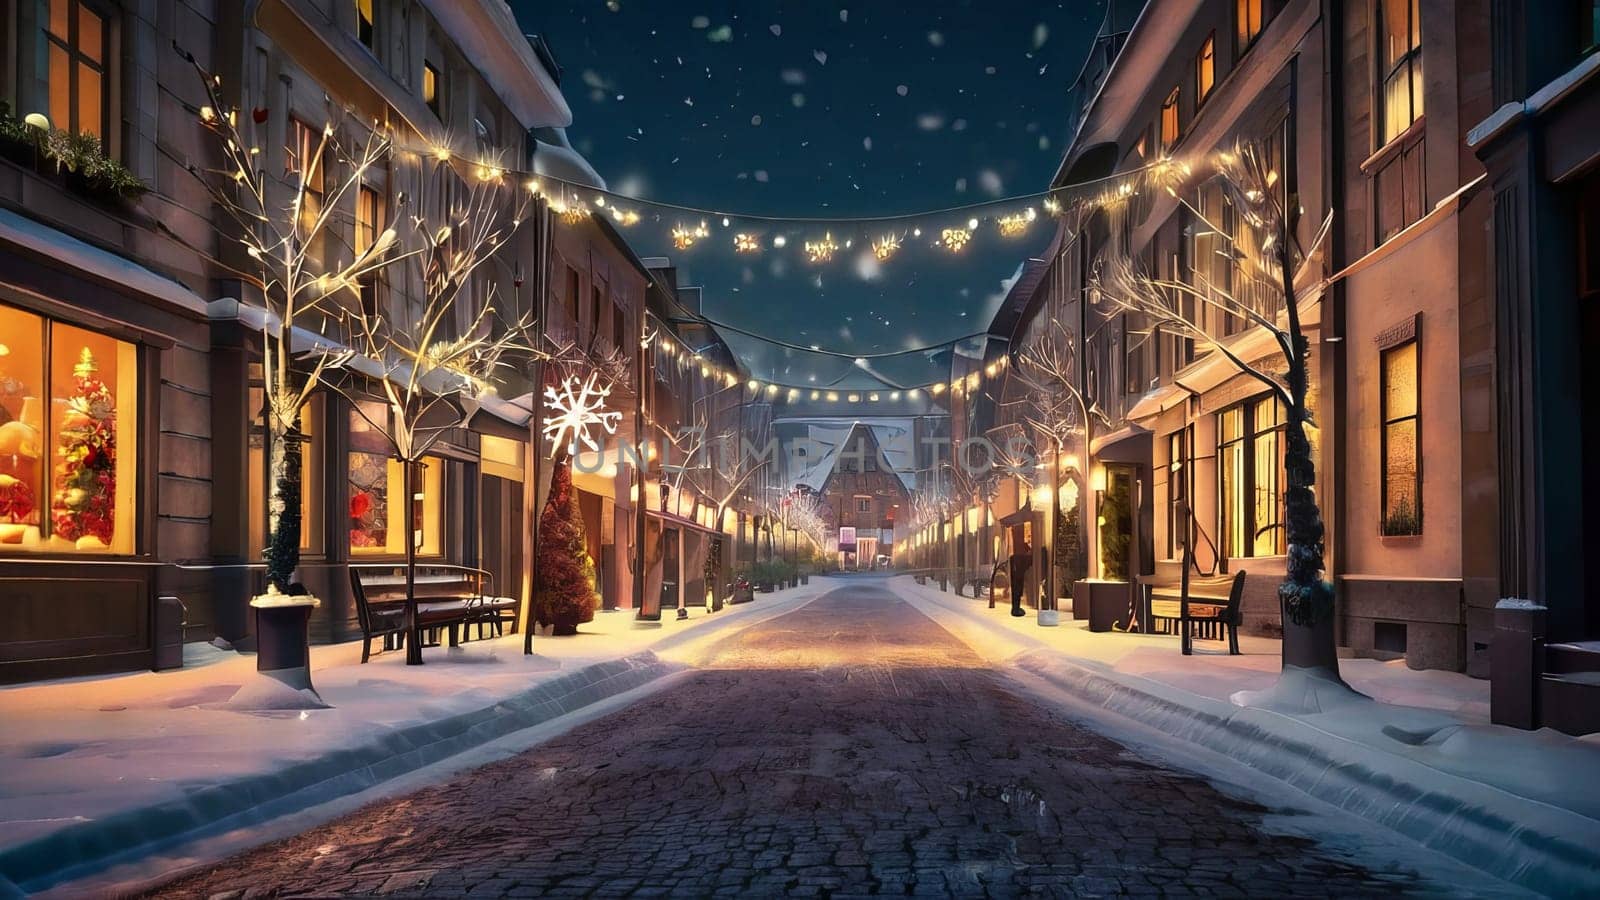 Festive winter wonderland street adorned with twinkling lights and festive décor